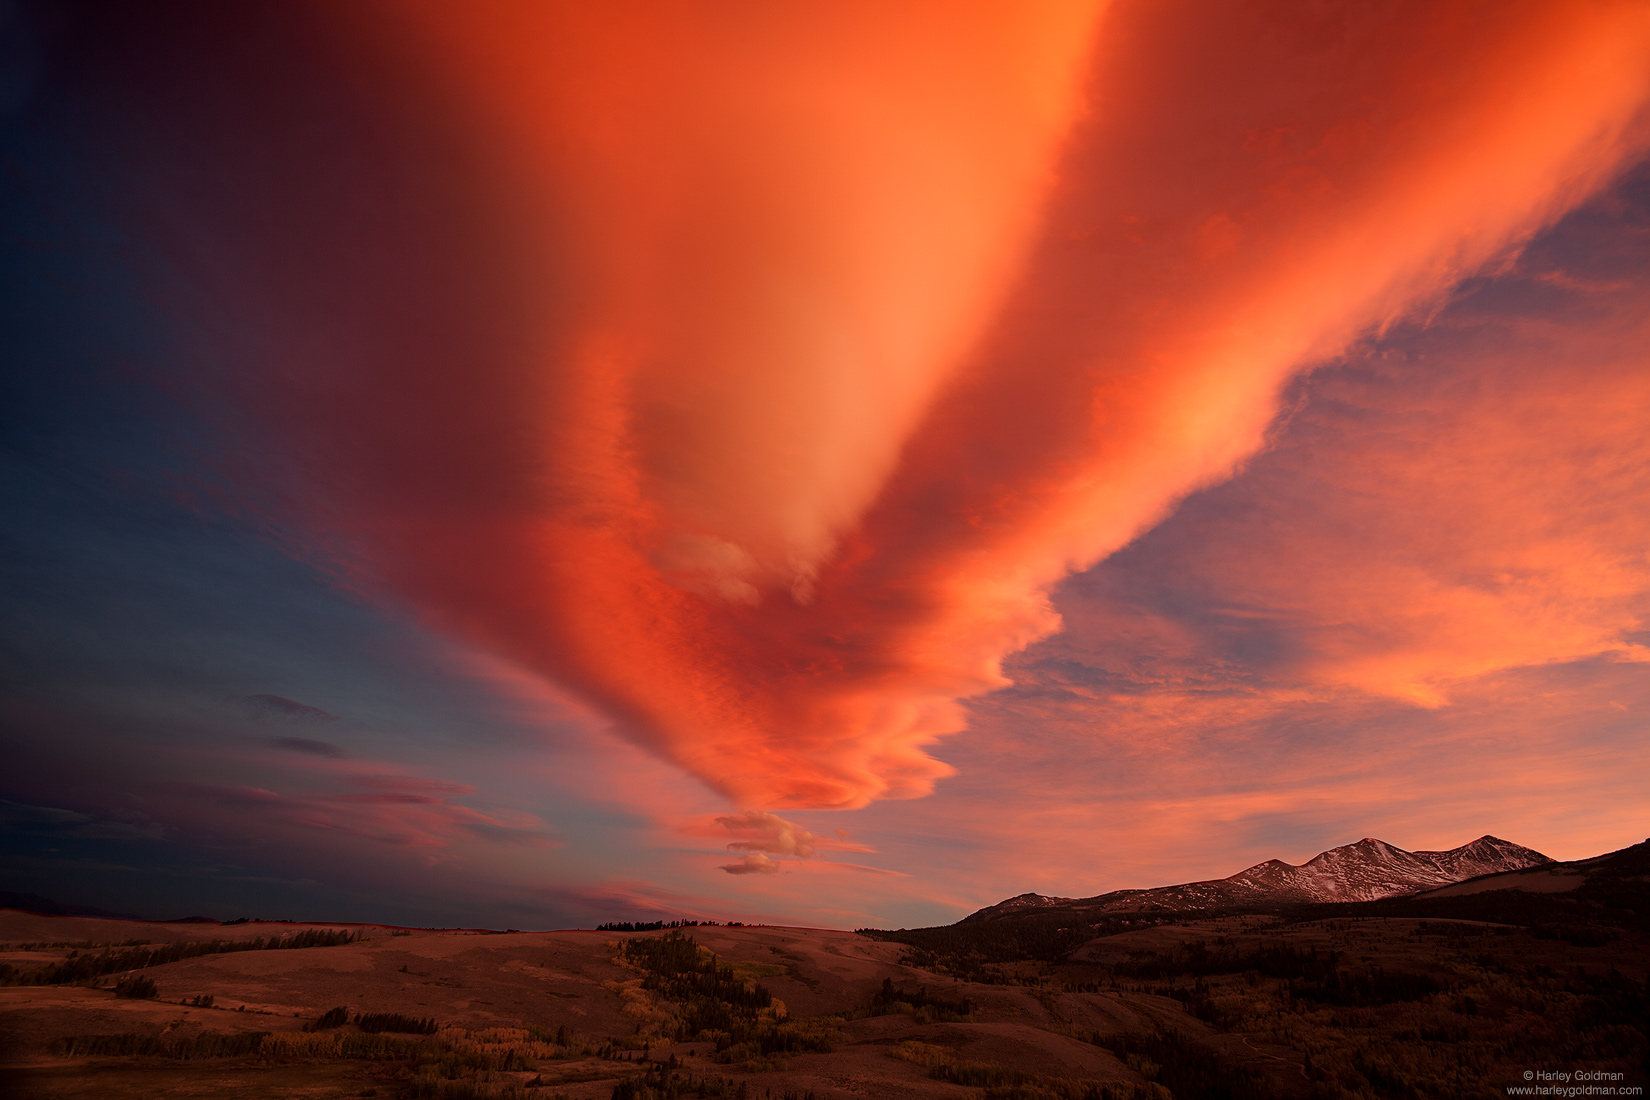 This type of cloud formation is known as the Sierra Wave, a lenticular cloud caused by winds off the mountains.